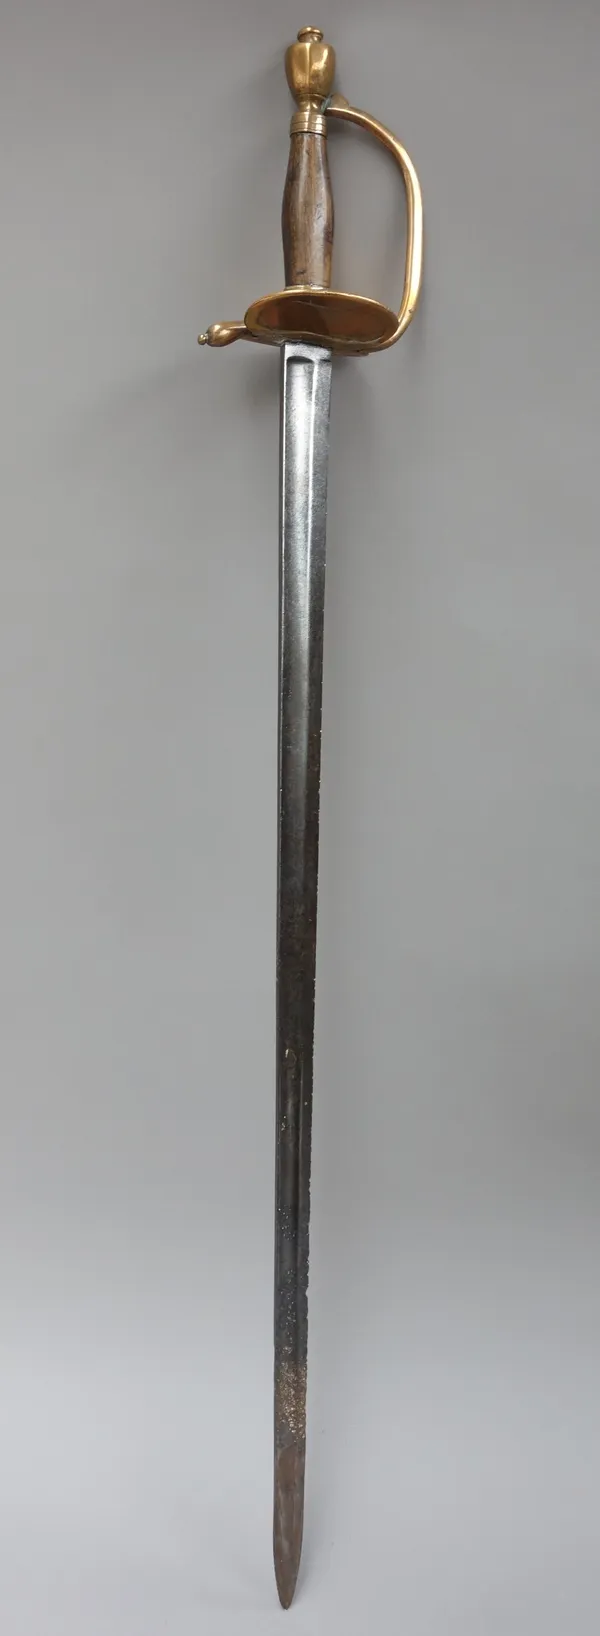 Two continental court swords, 19th century, each with straight steel blades, brass guard and wooden grips (91cm) and an African tribal knife. (3)